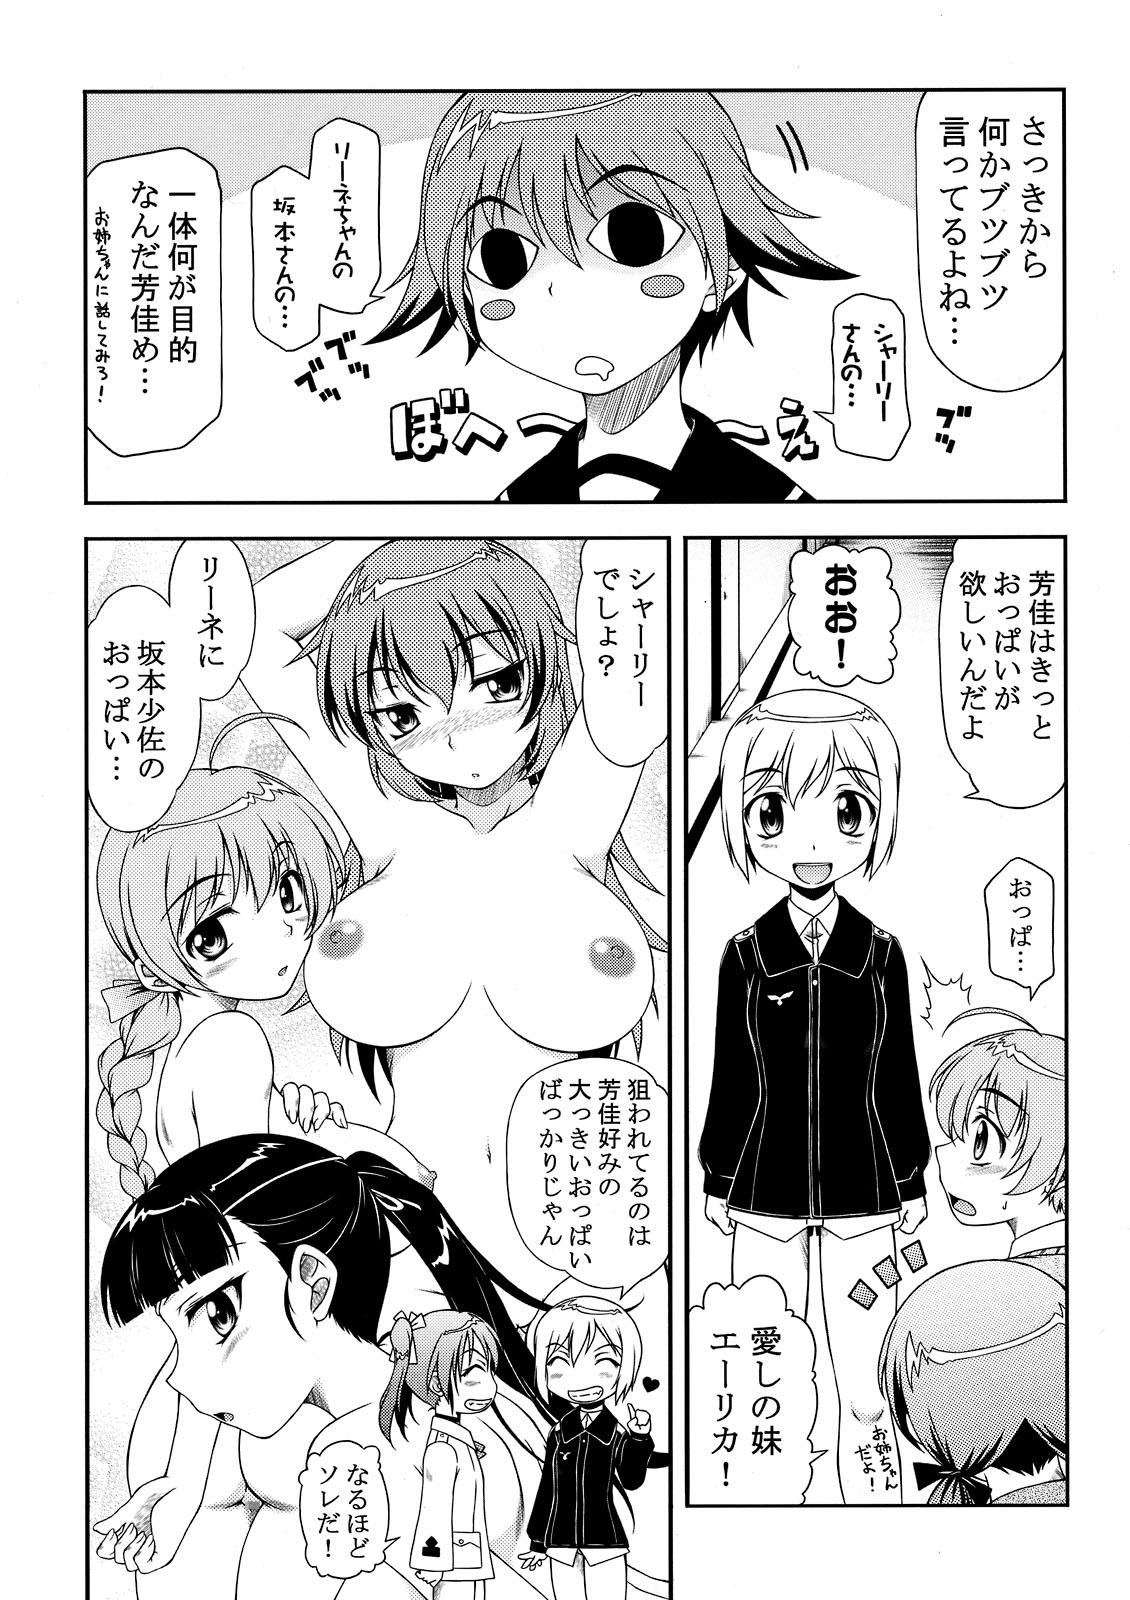 Edging Hokyuubusshi 501 - Strike witches Pain - Page 8